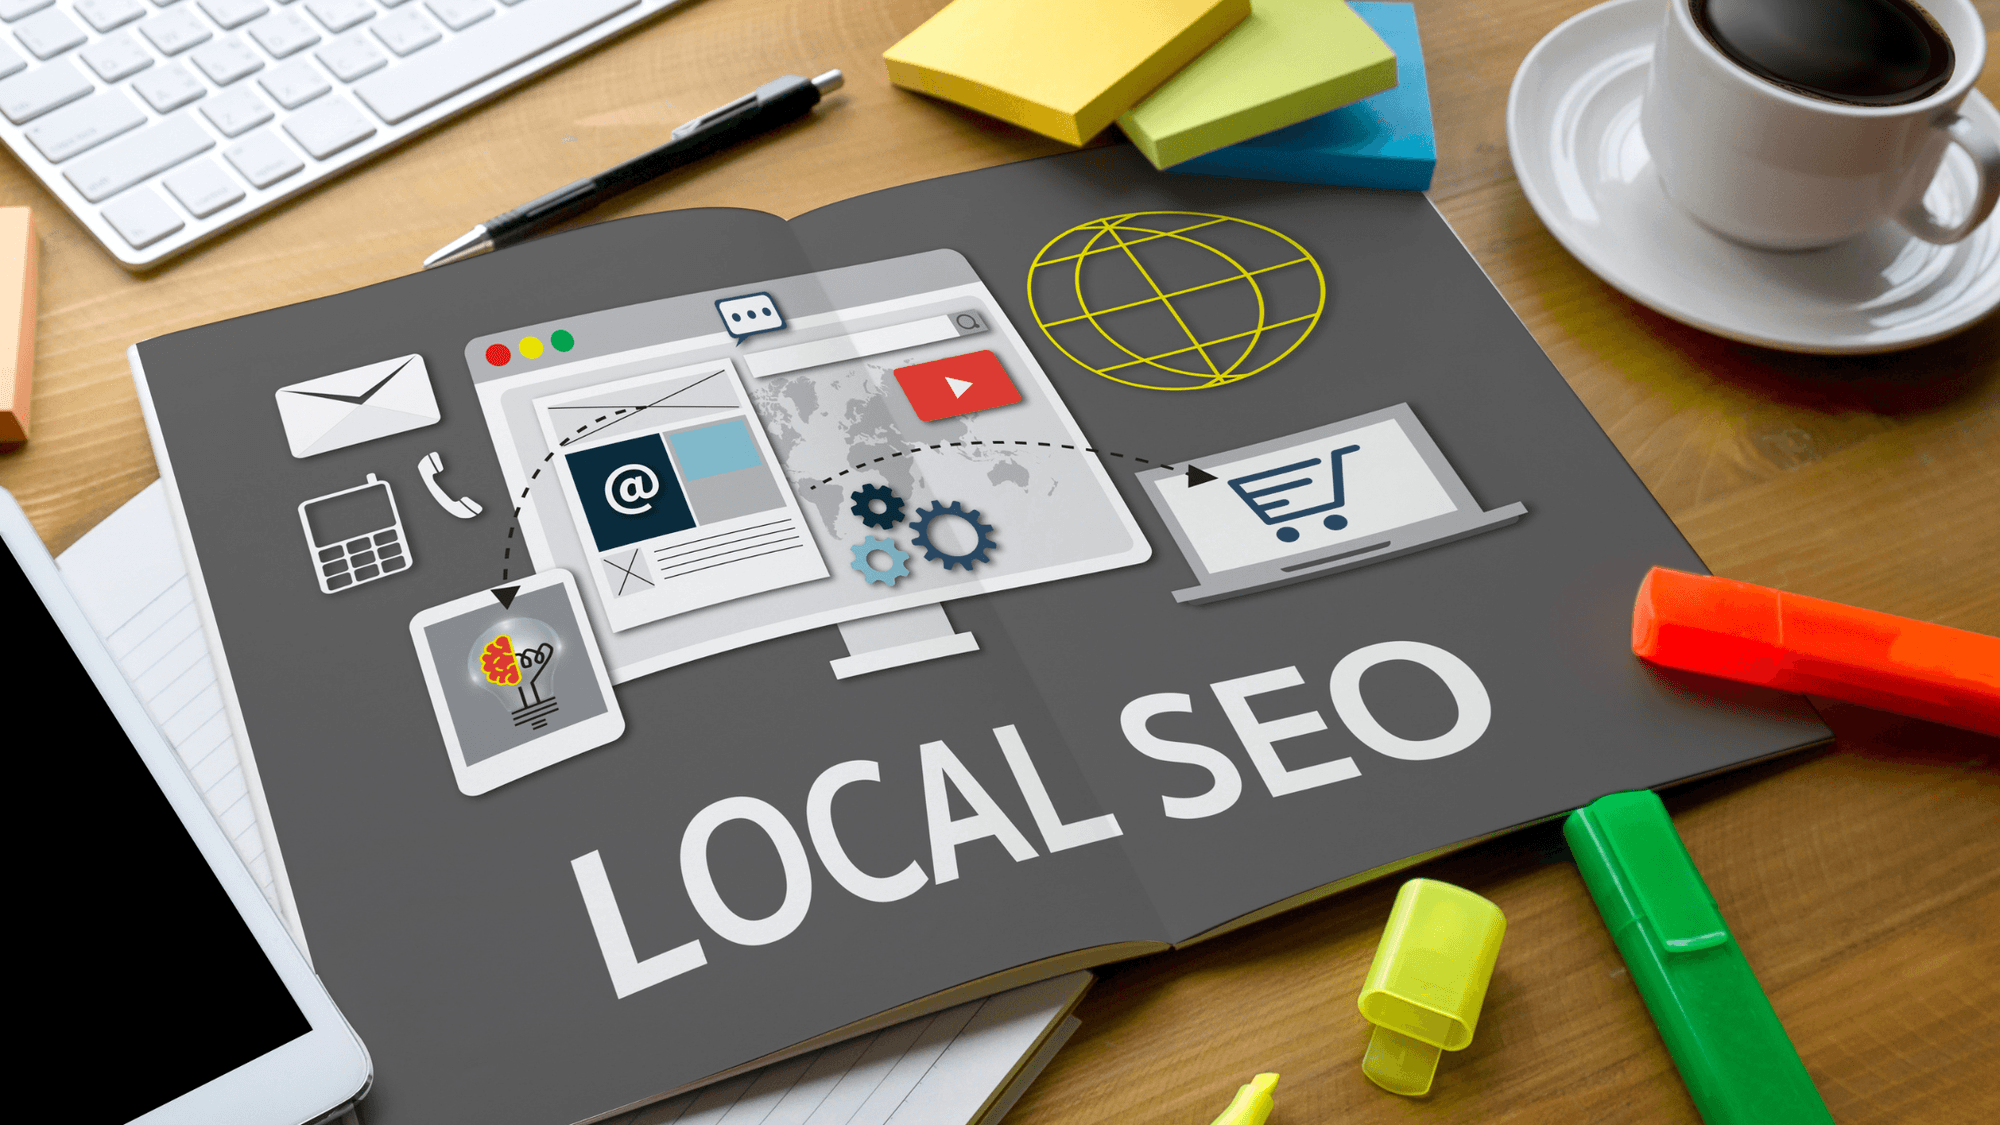 1 1 Cf47d4251dec0e453fdc2142e9bfea52 2000 How Location Pages Help With Local SEO